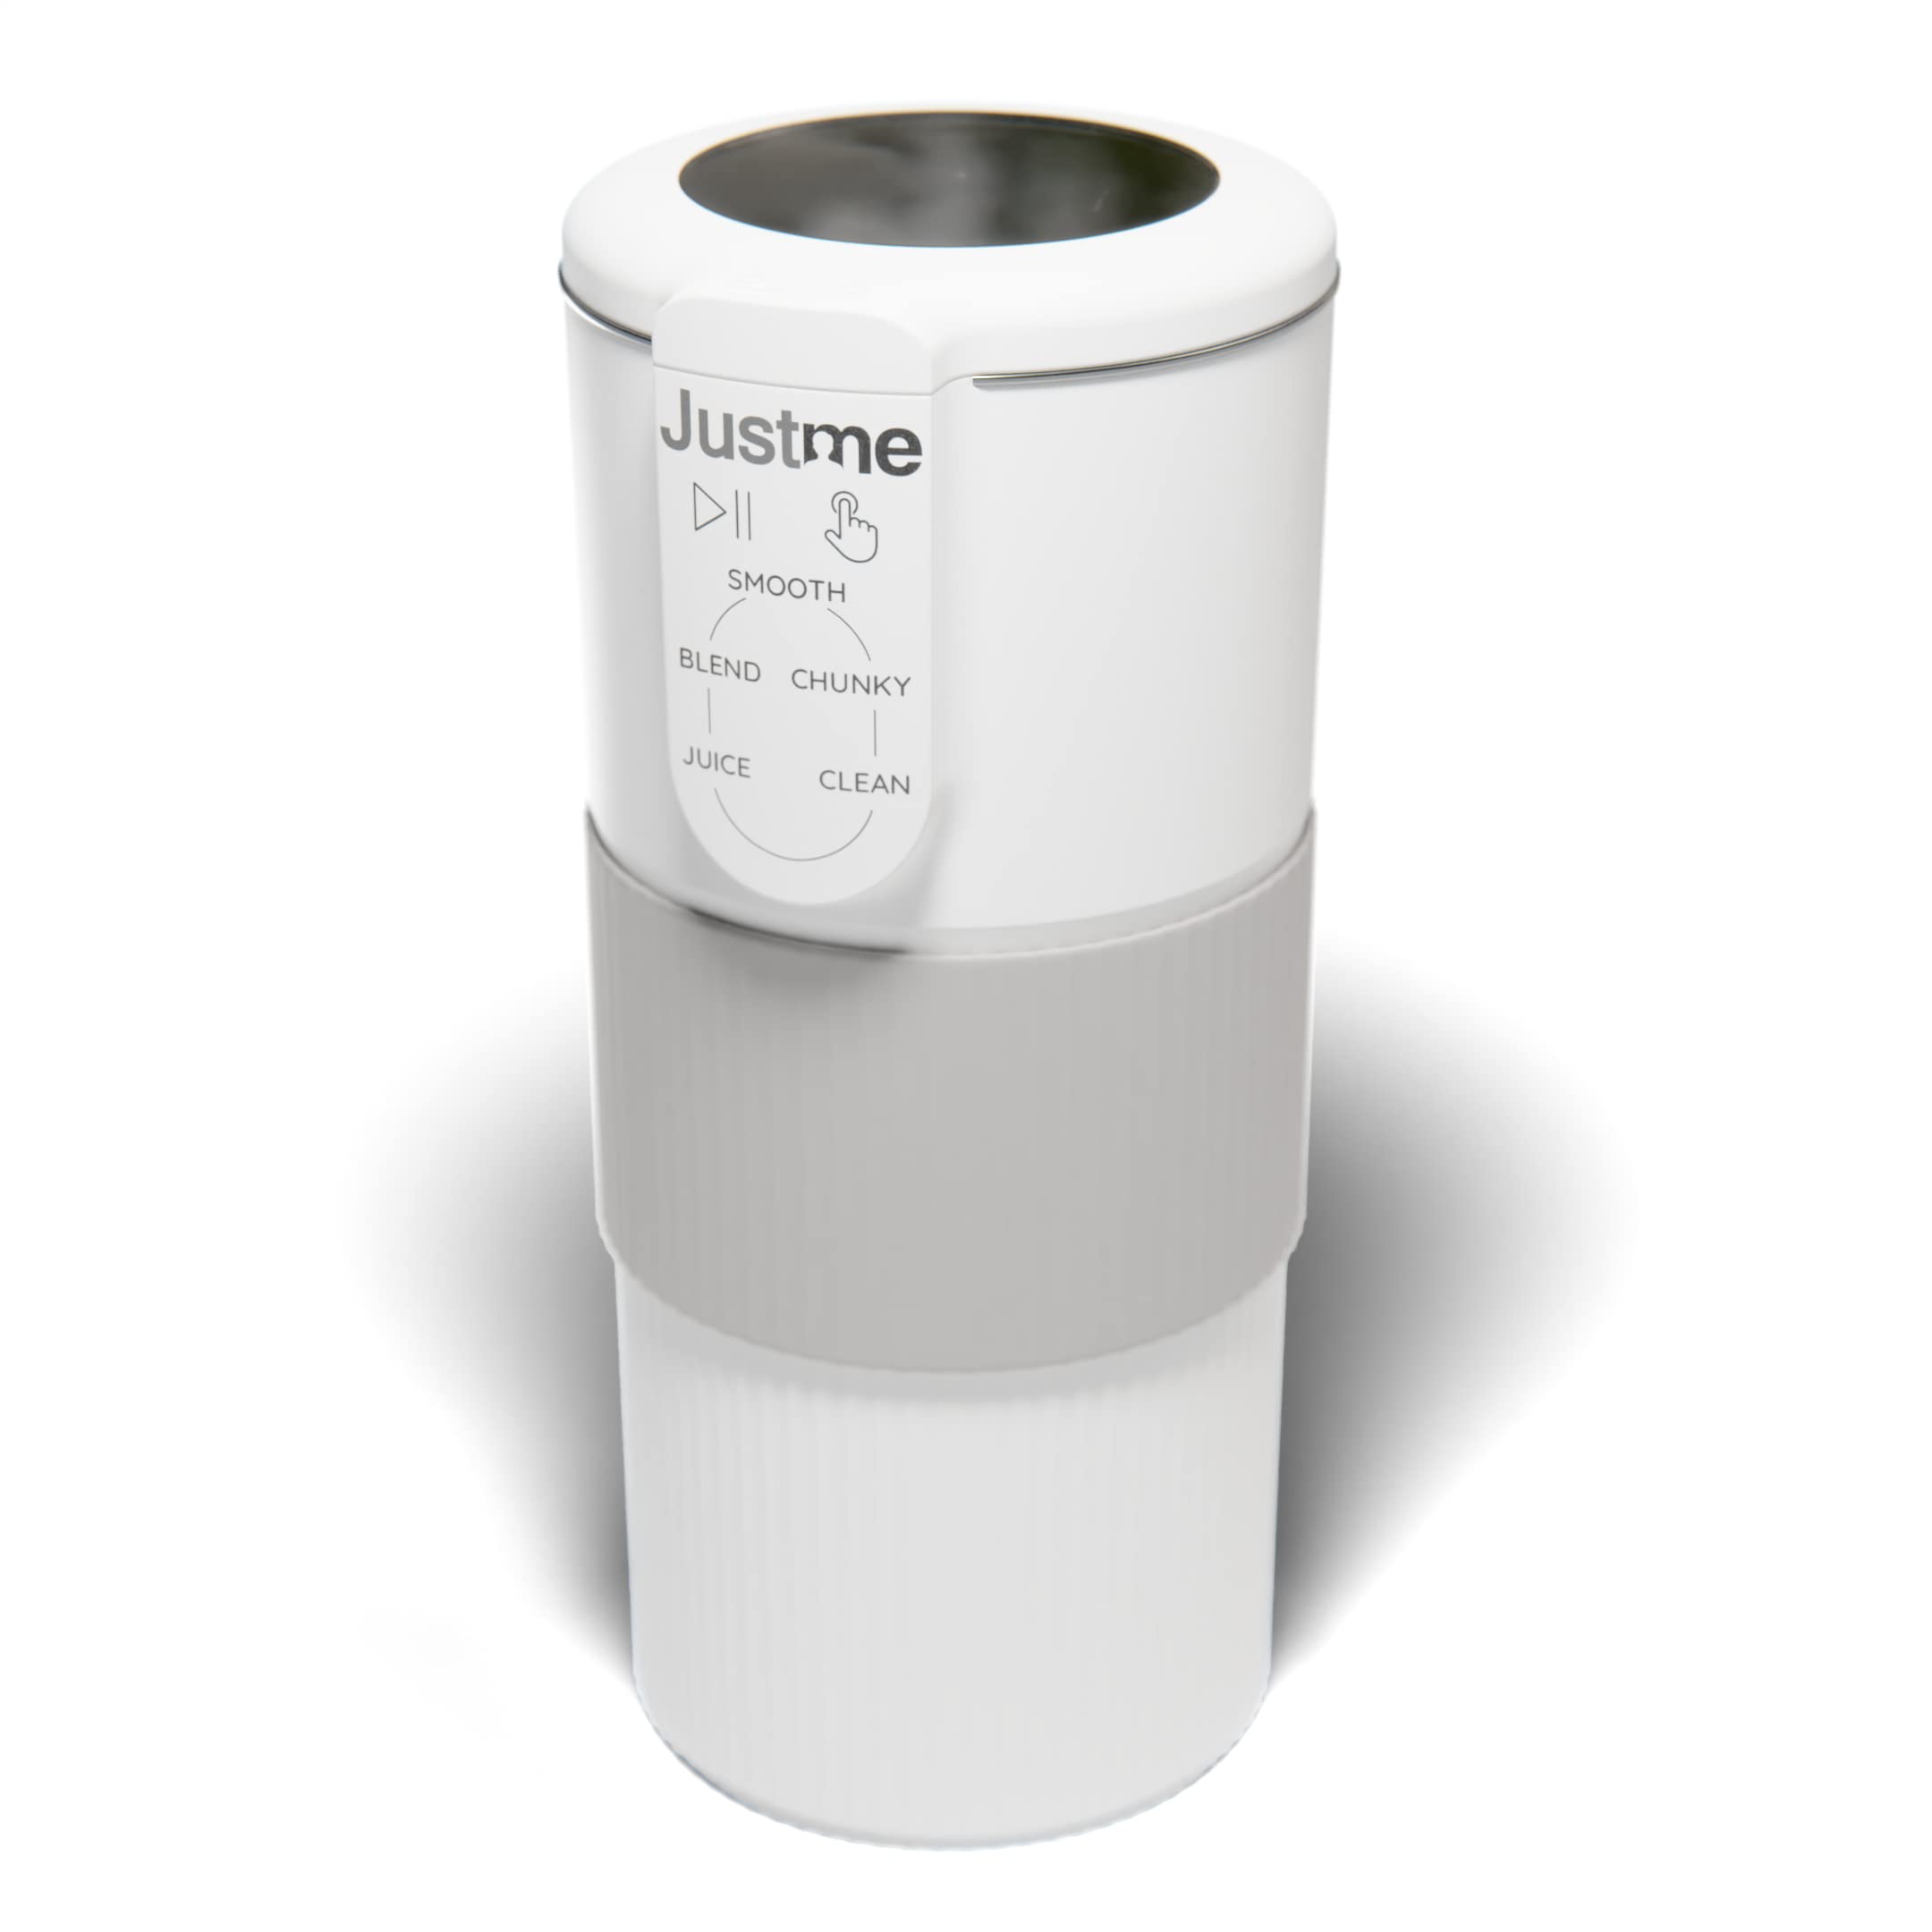 Justme Small Soup Maker